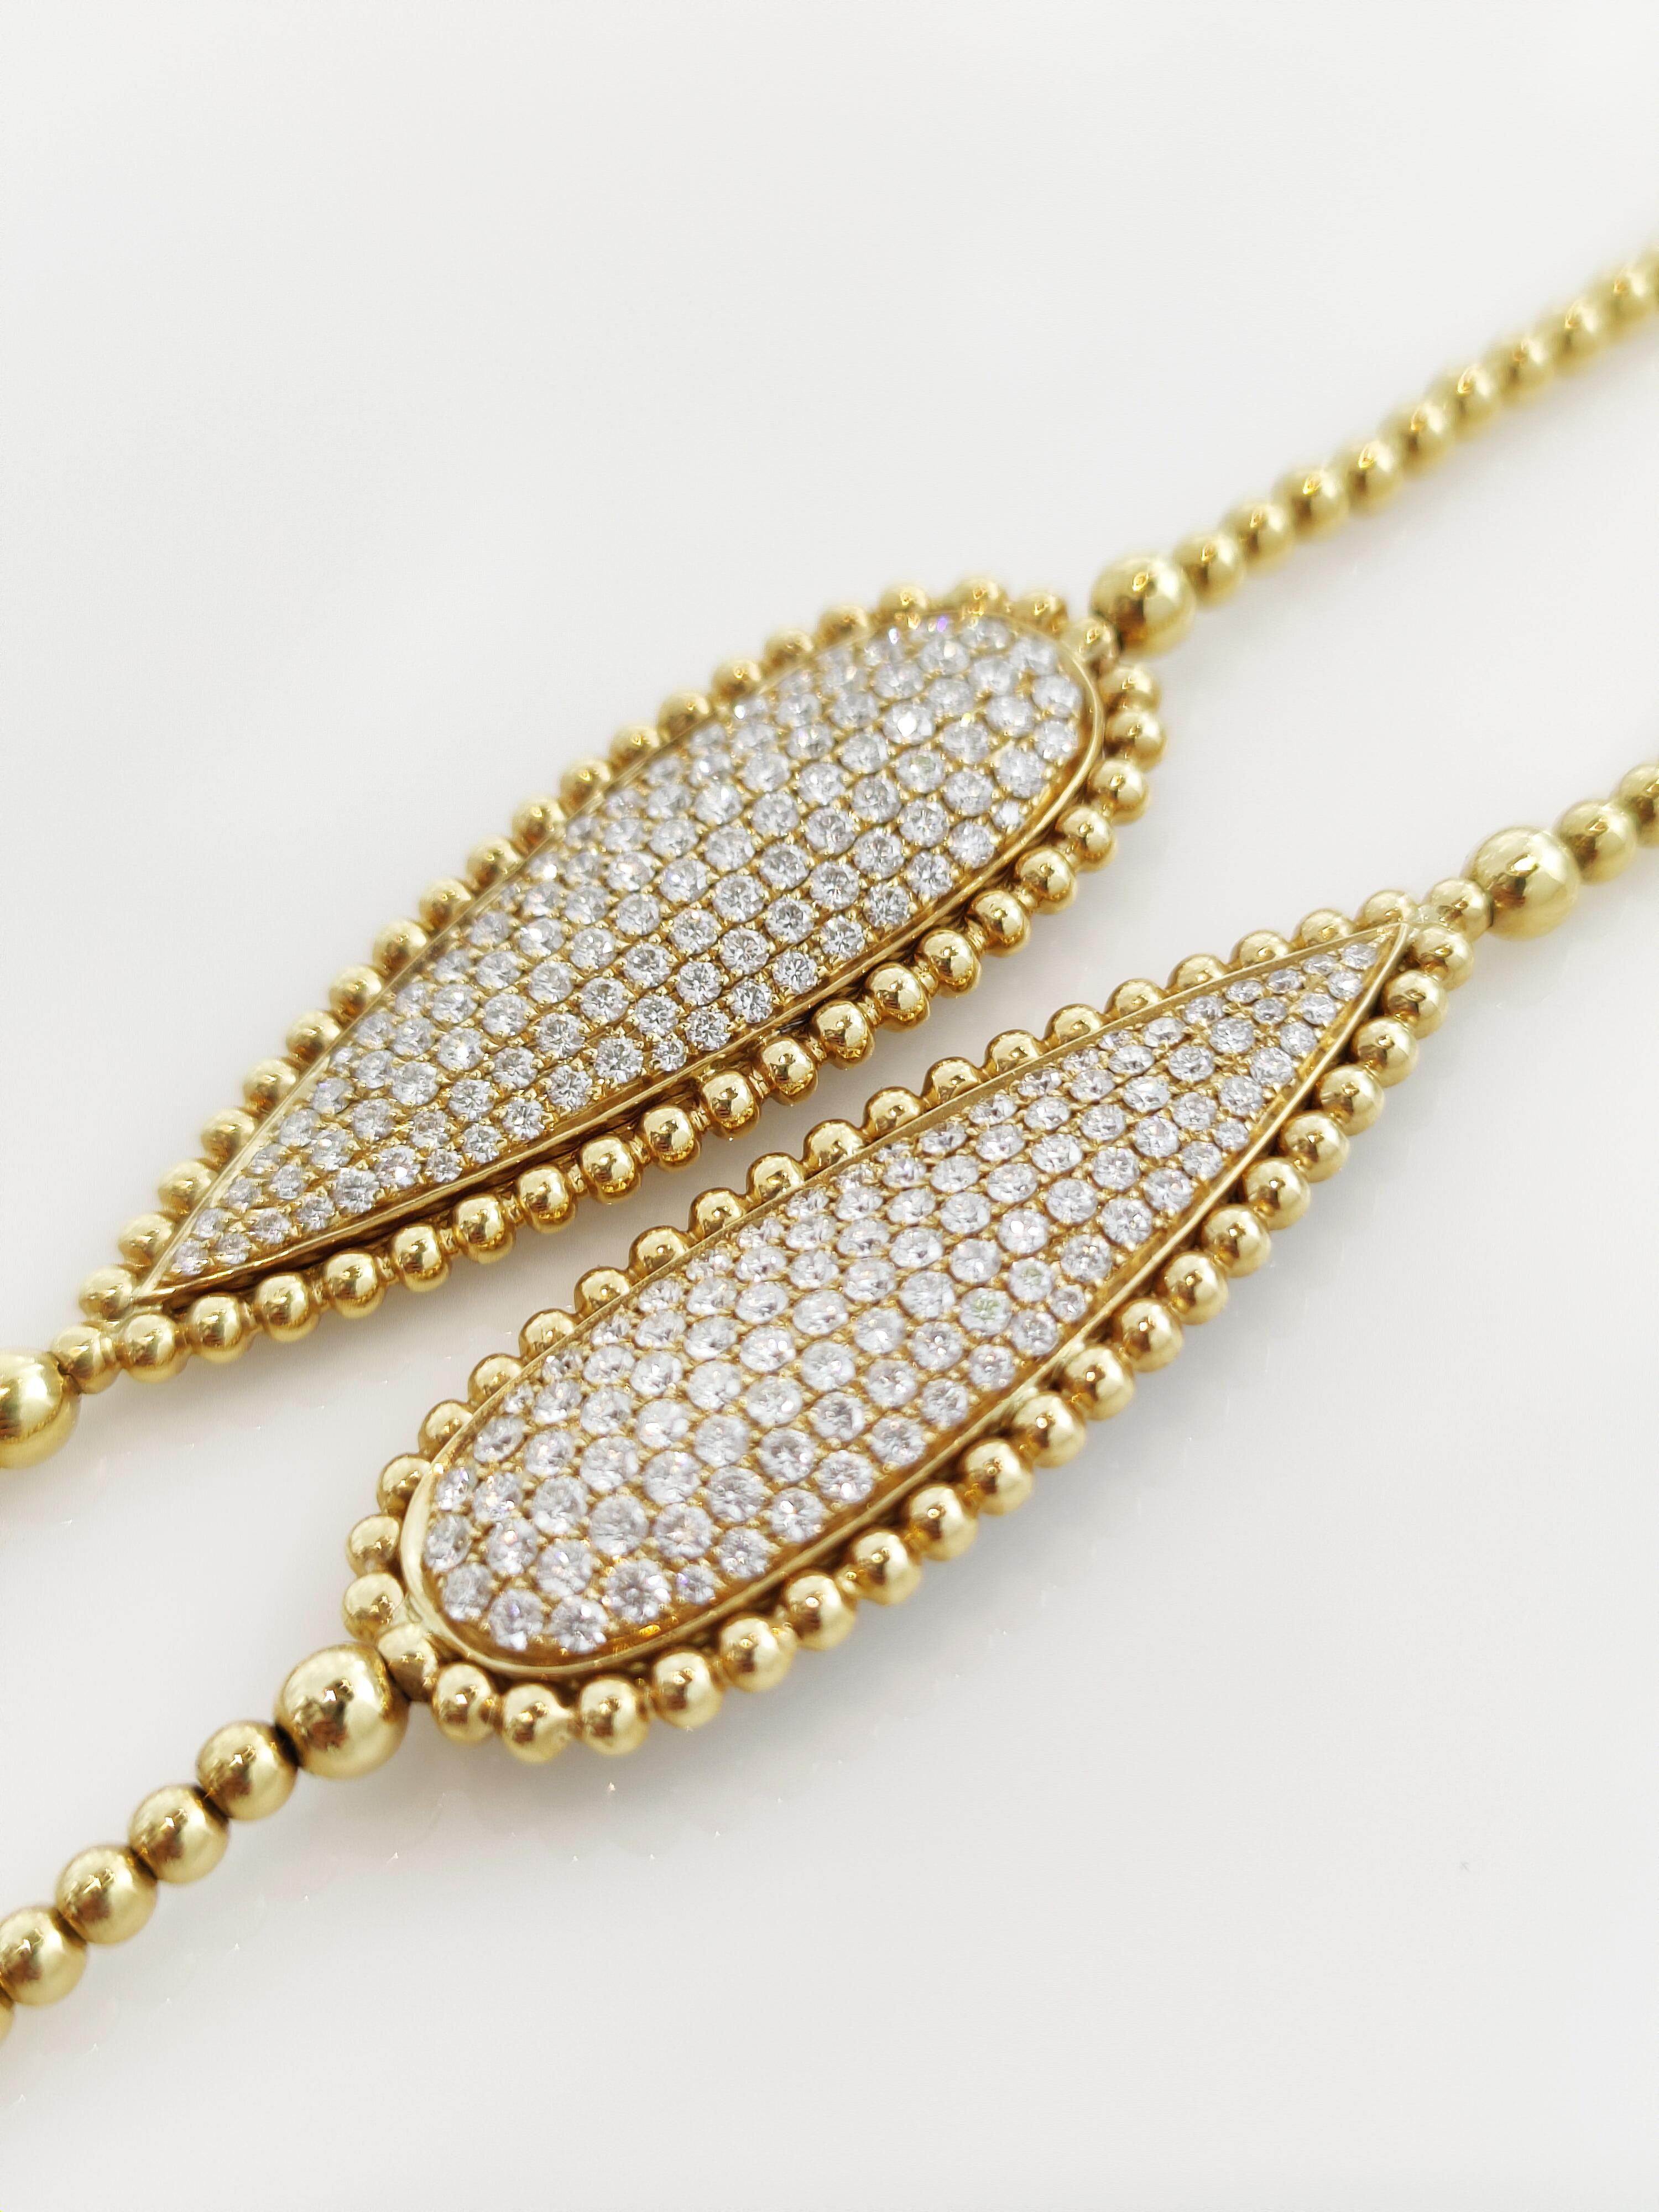 Bonebakker 18 Karat Gold Long Neckace with 7.57ct Pave Diamonds In New Condition For Sale In Amsterdam, NL